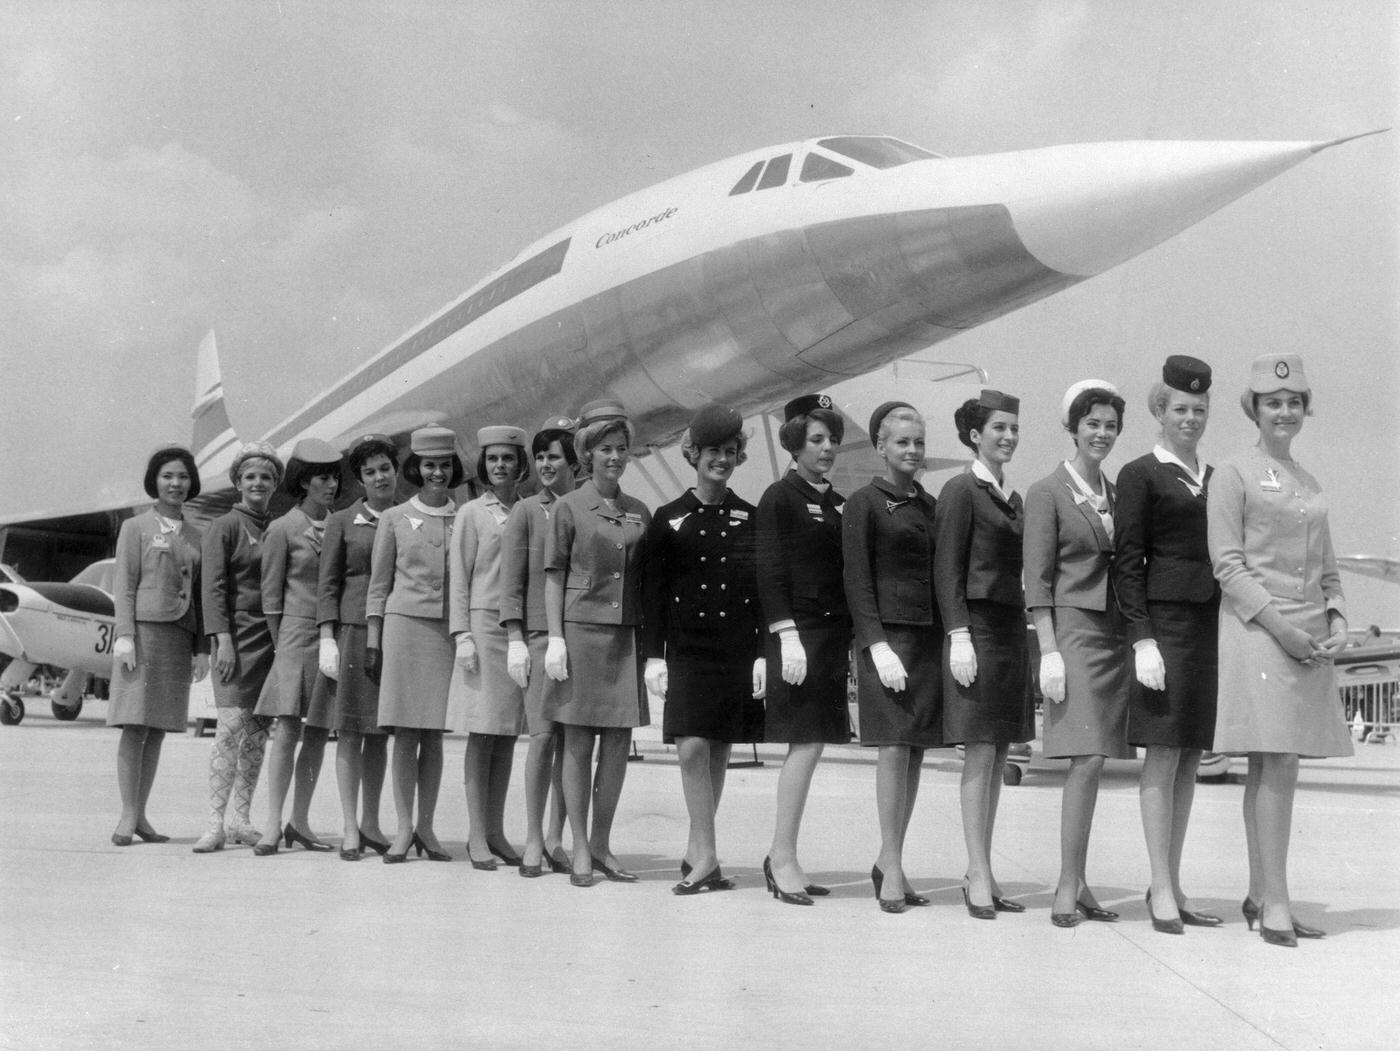 A lineup of air stewardesses from different airlines attending to passengers on board the supersonic jet Concorde, standing in front of a scale model of the aircraft.